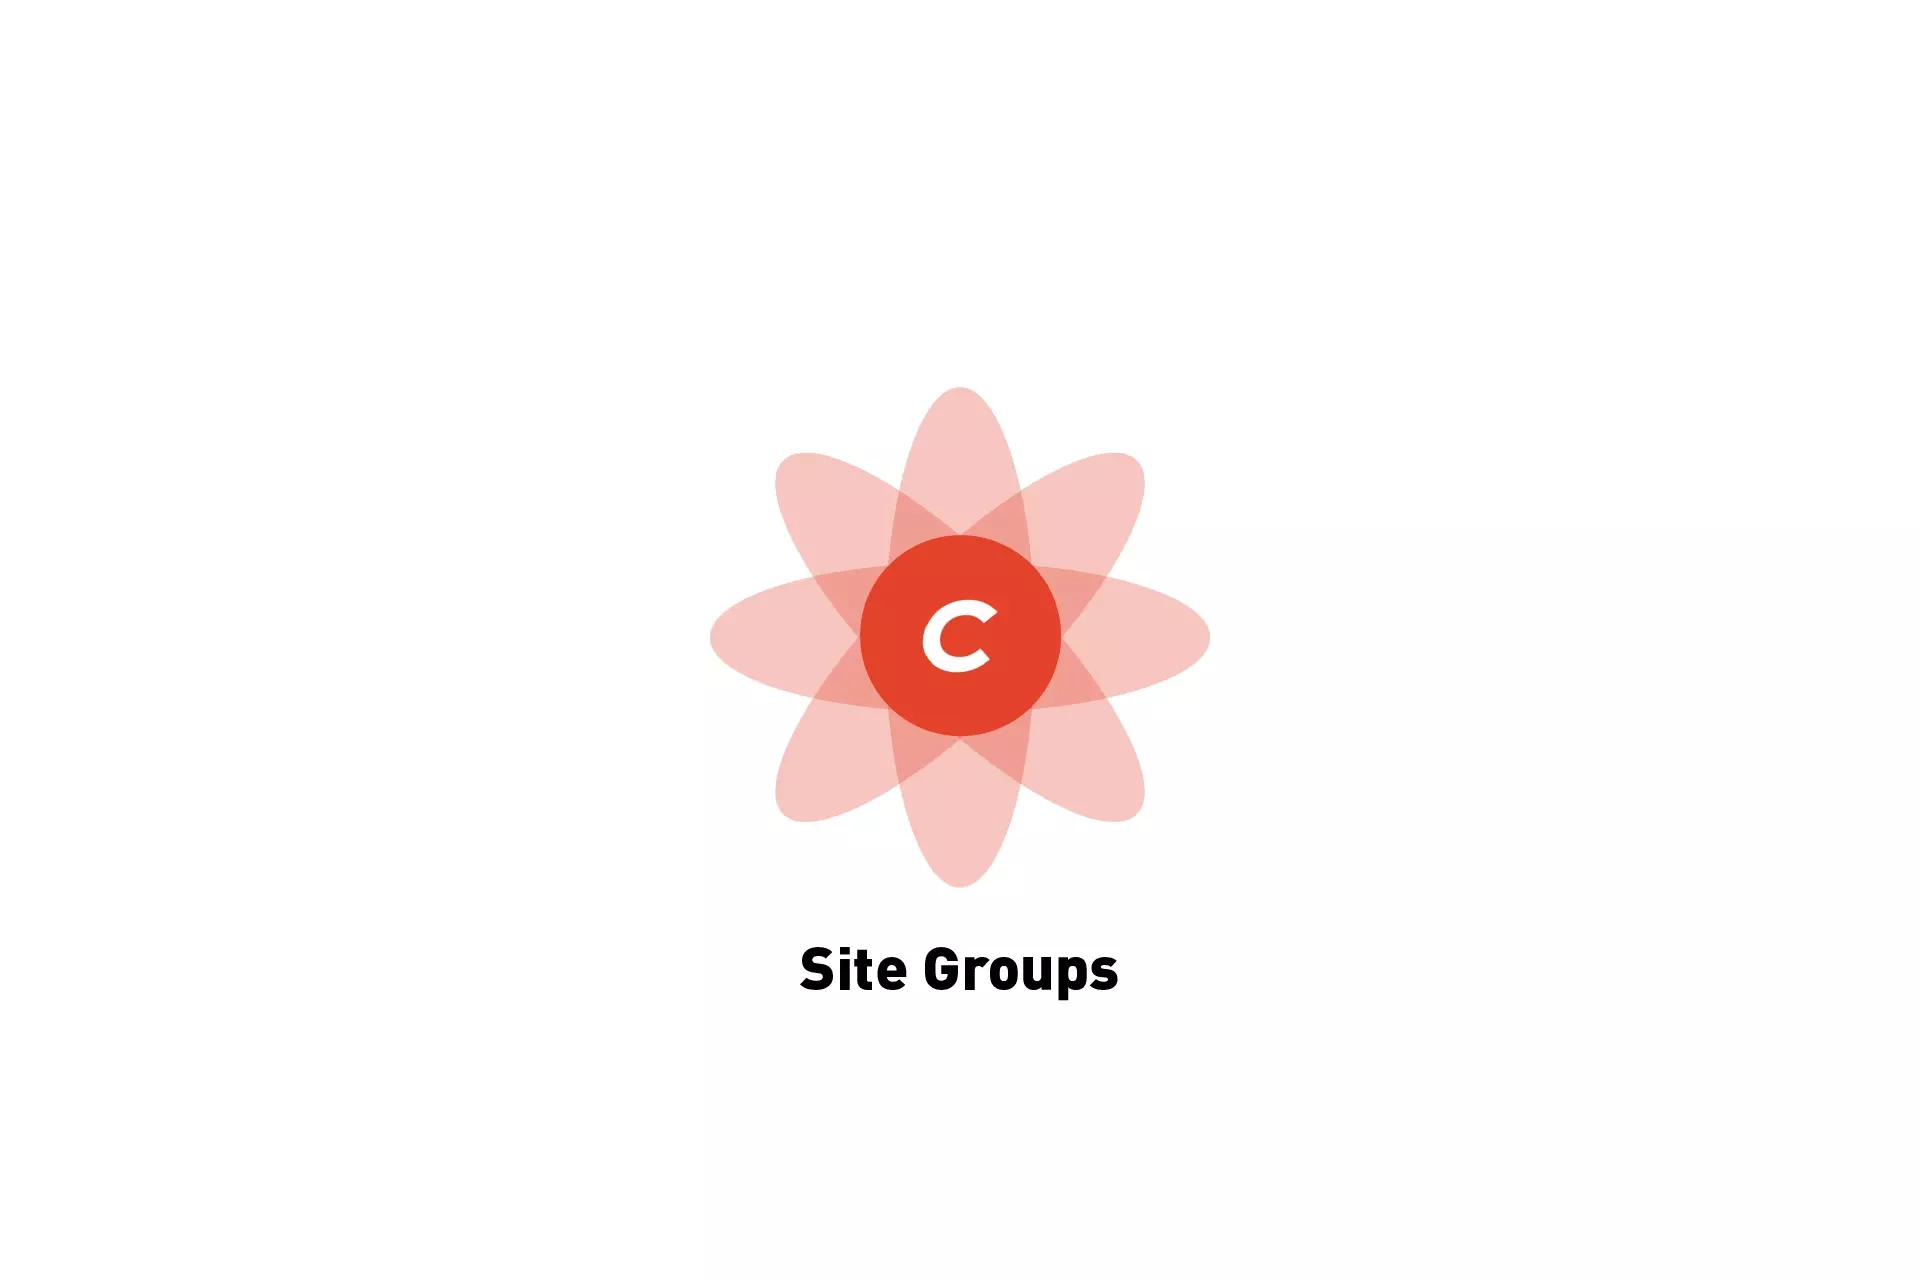 A flower that represents Craft CMS. Beneath it sits the text "Site Groups."